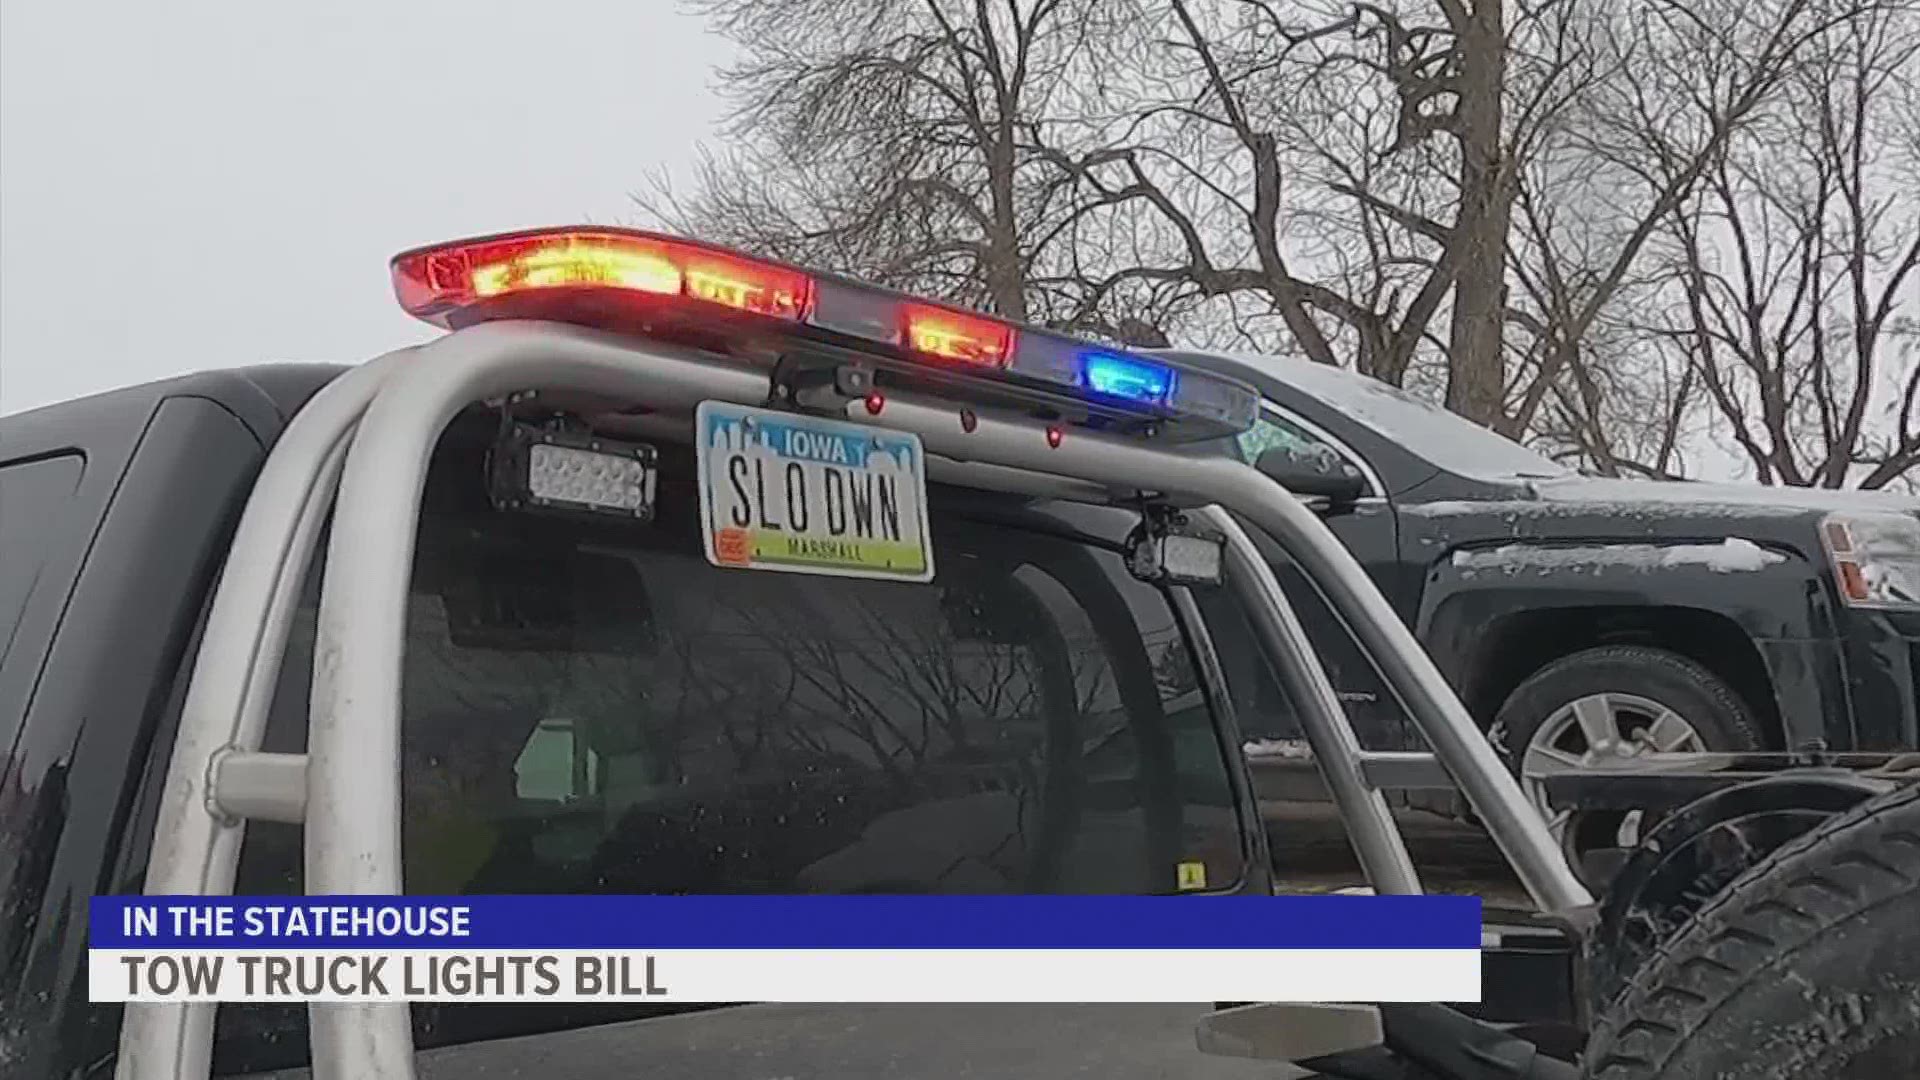 A bill moving through the Iowa Senate would make it illegal for civilian tow trucks to use red and blue lights. Tow truck drivers say this could be dangerous.